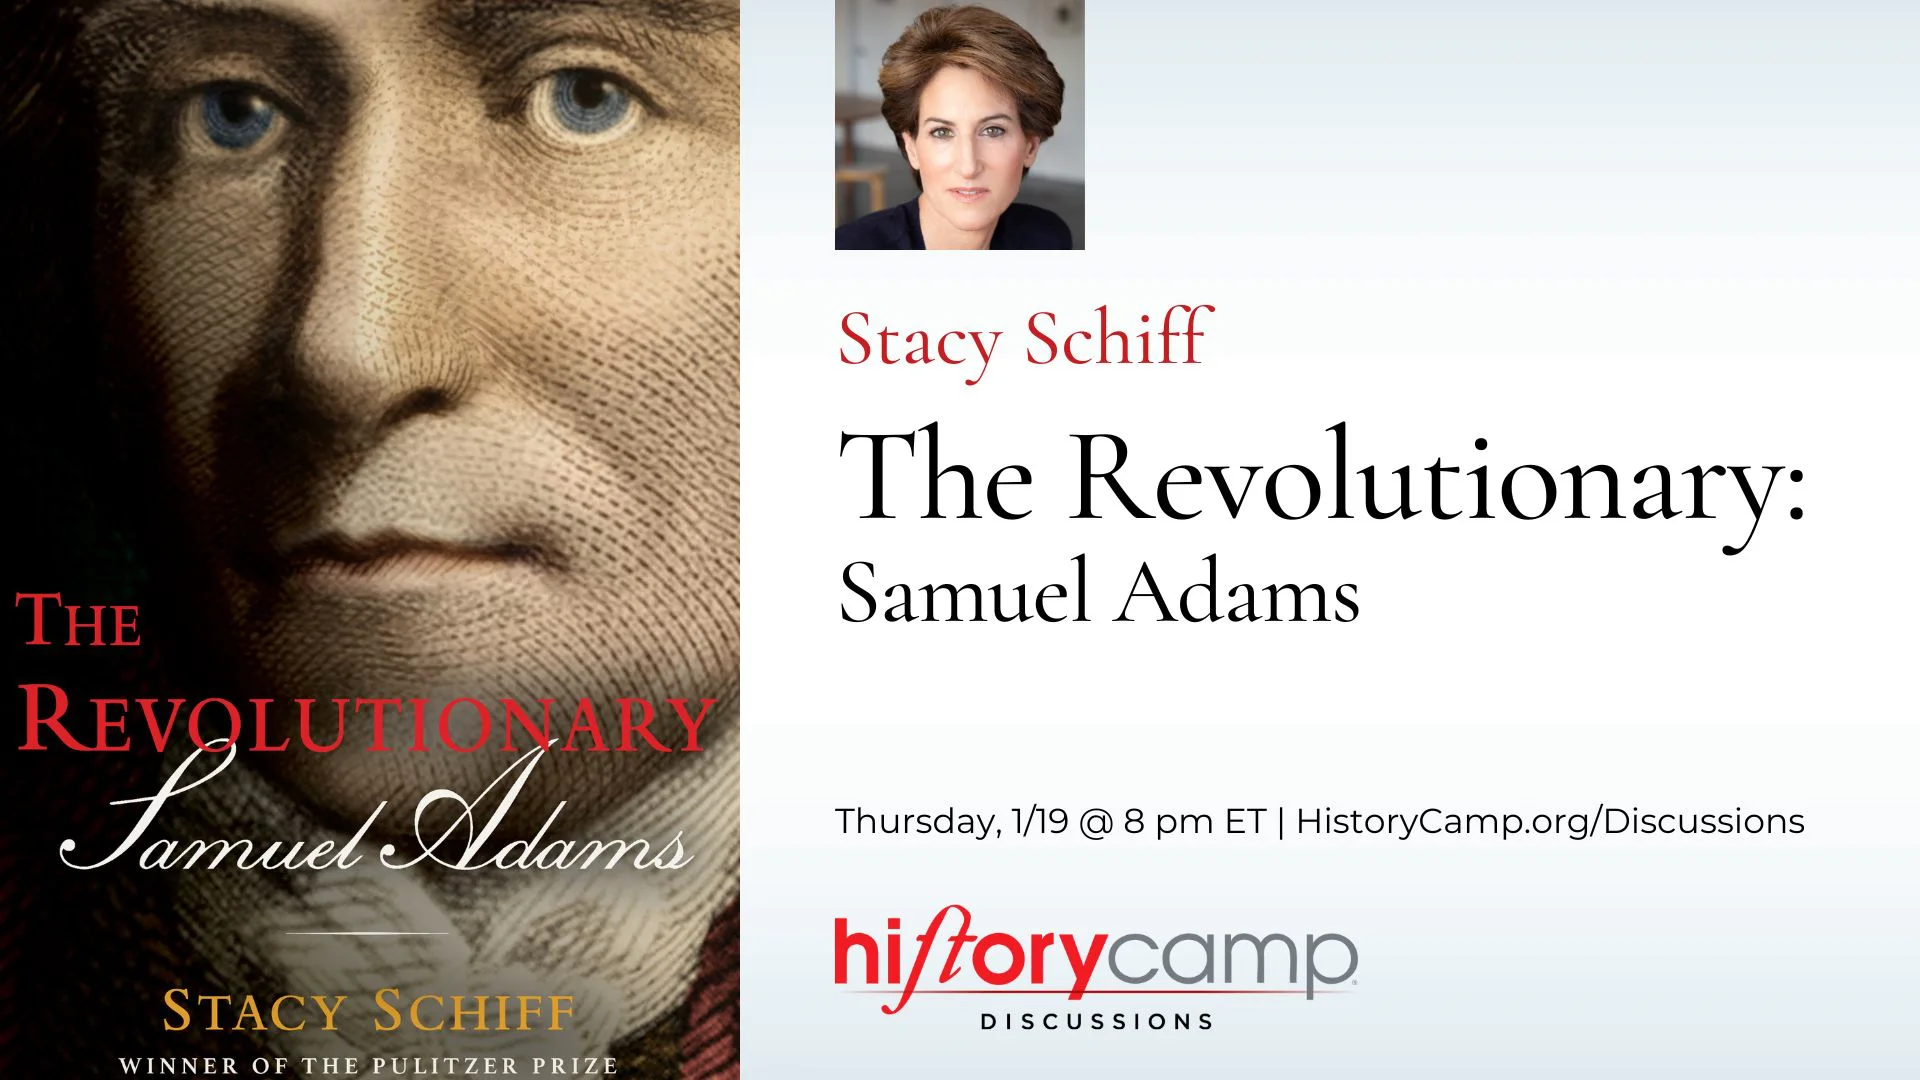 Book Review of The Revolutionary: Samuel Adams by Stacy Schiff